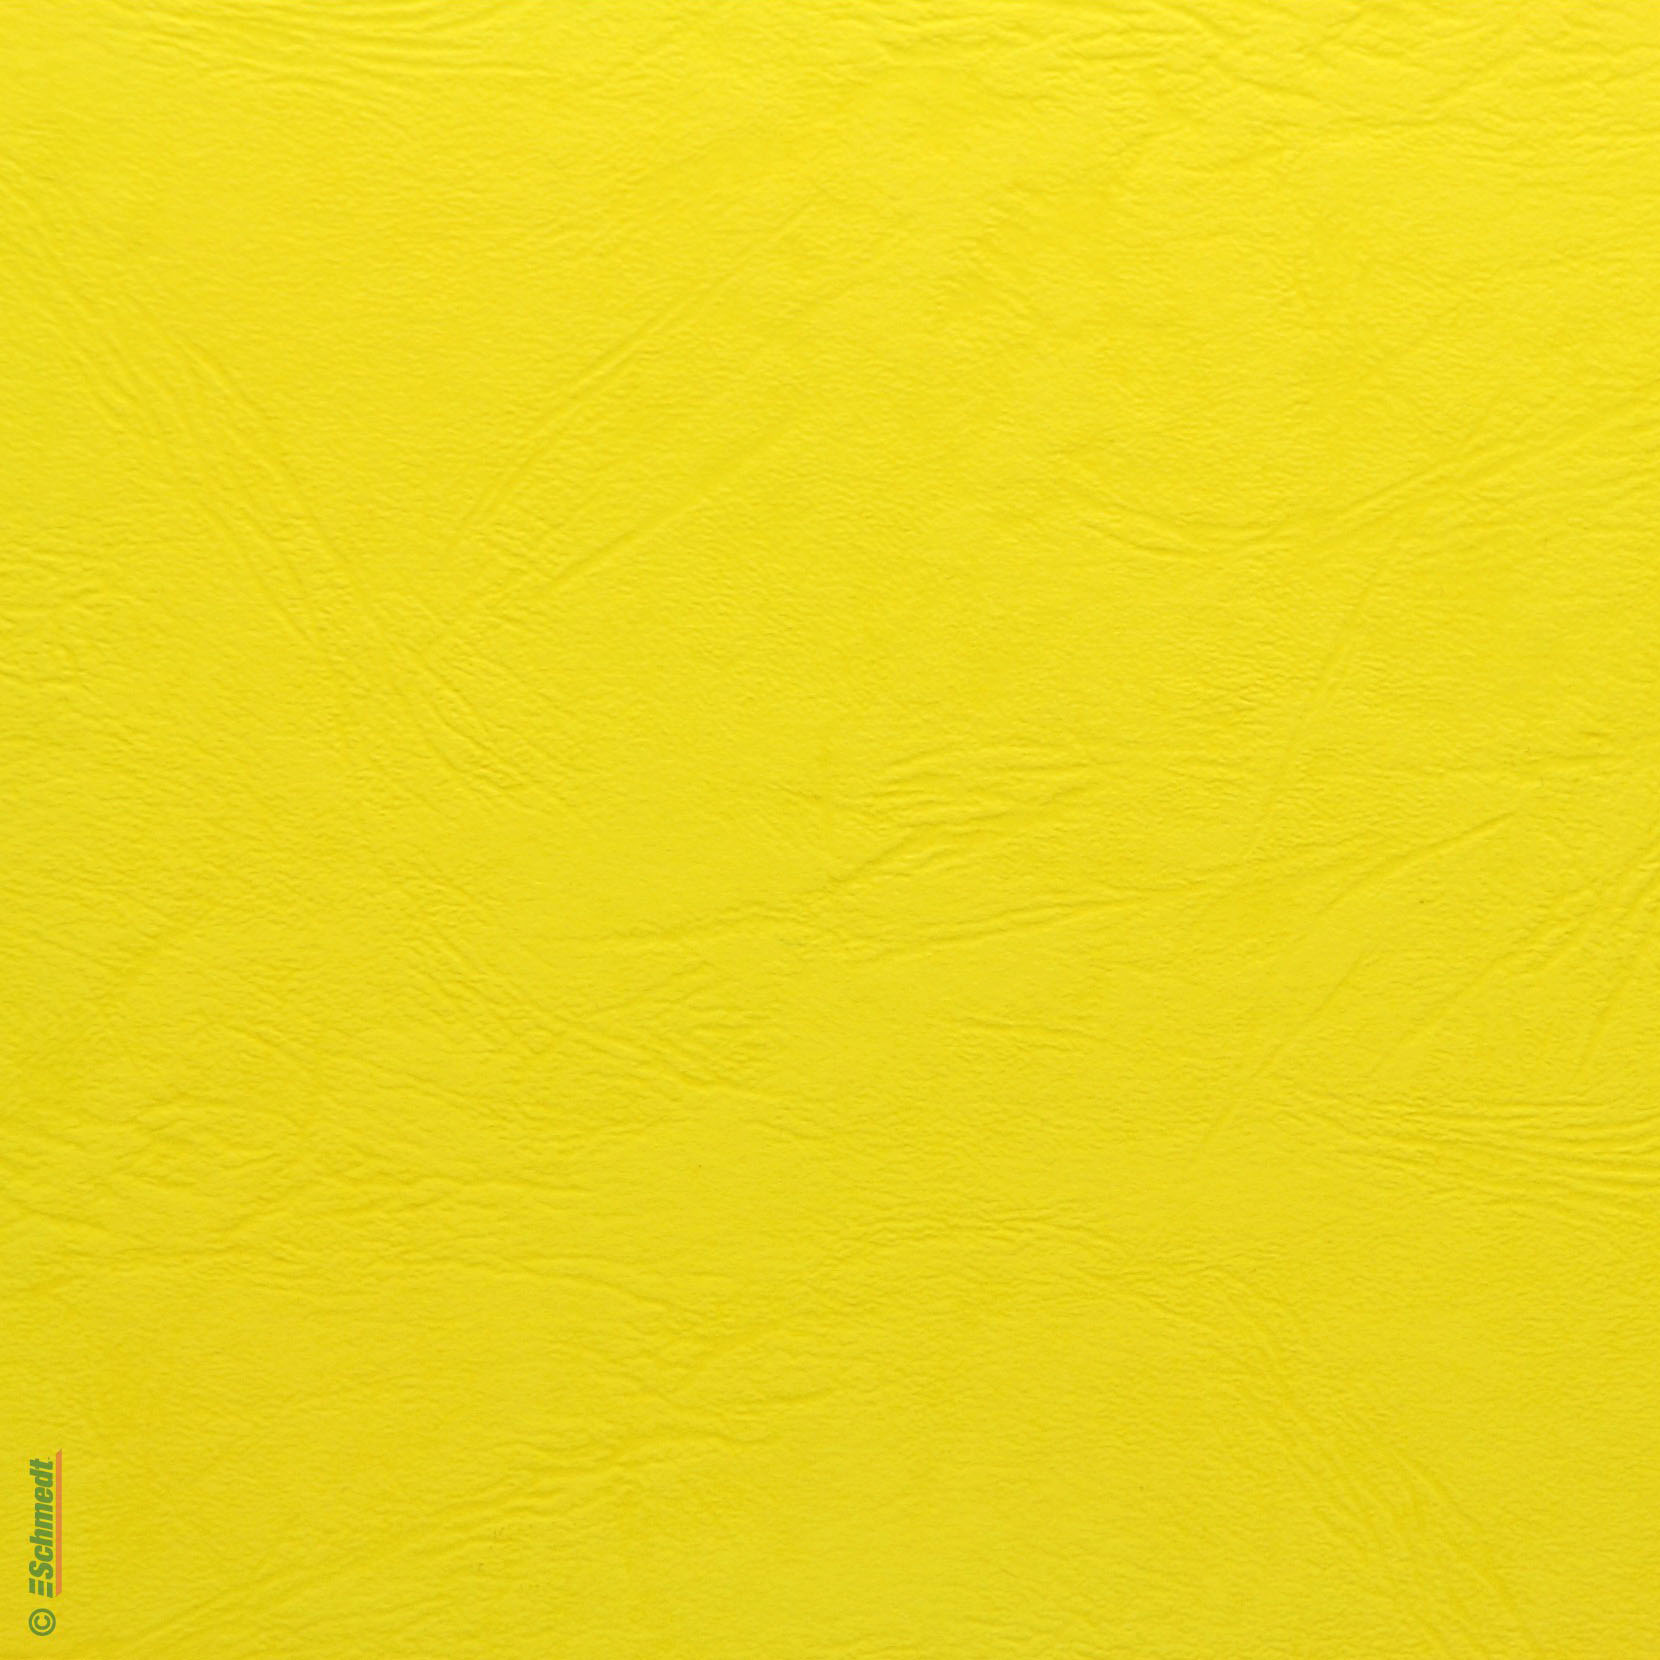 Cover board - leather emboss - Colour 022 - lemon yellow - used as cover for books and brochures, for folders, model making, greeting cards ...